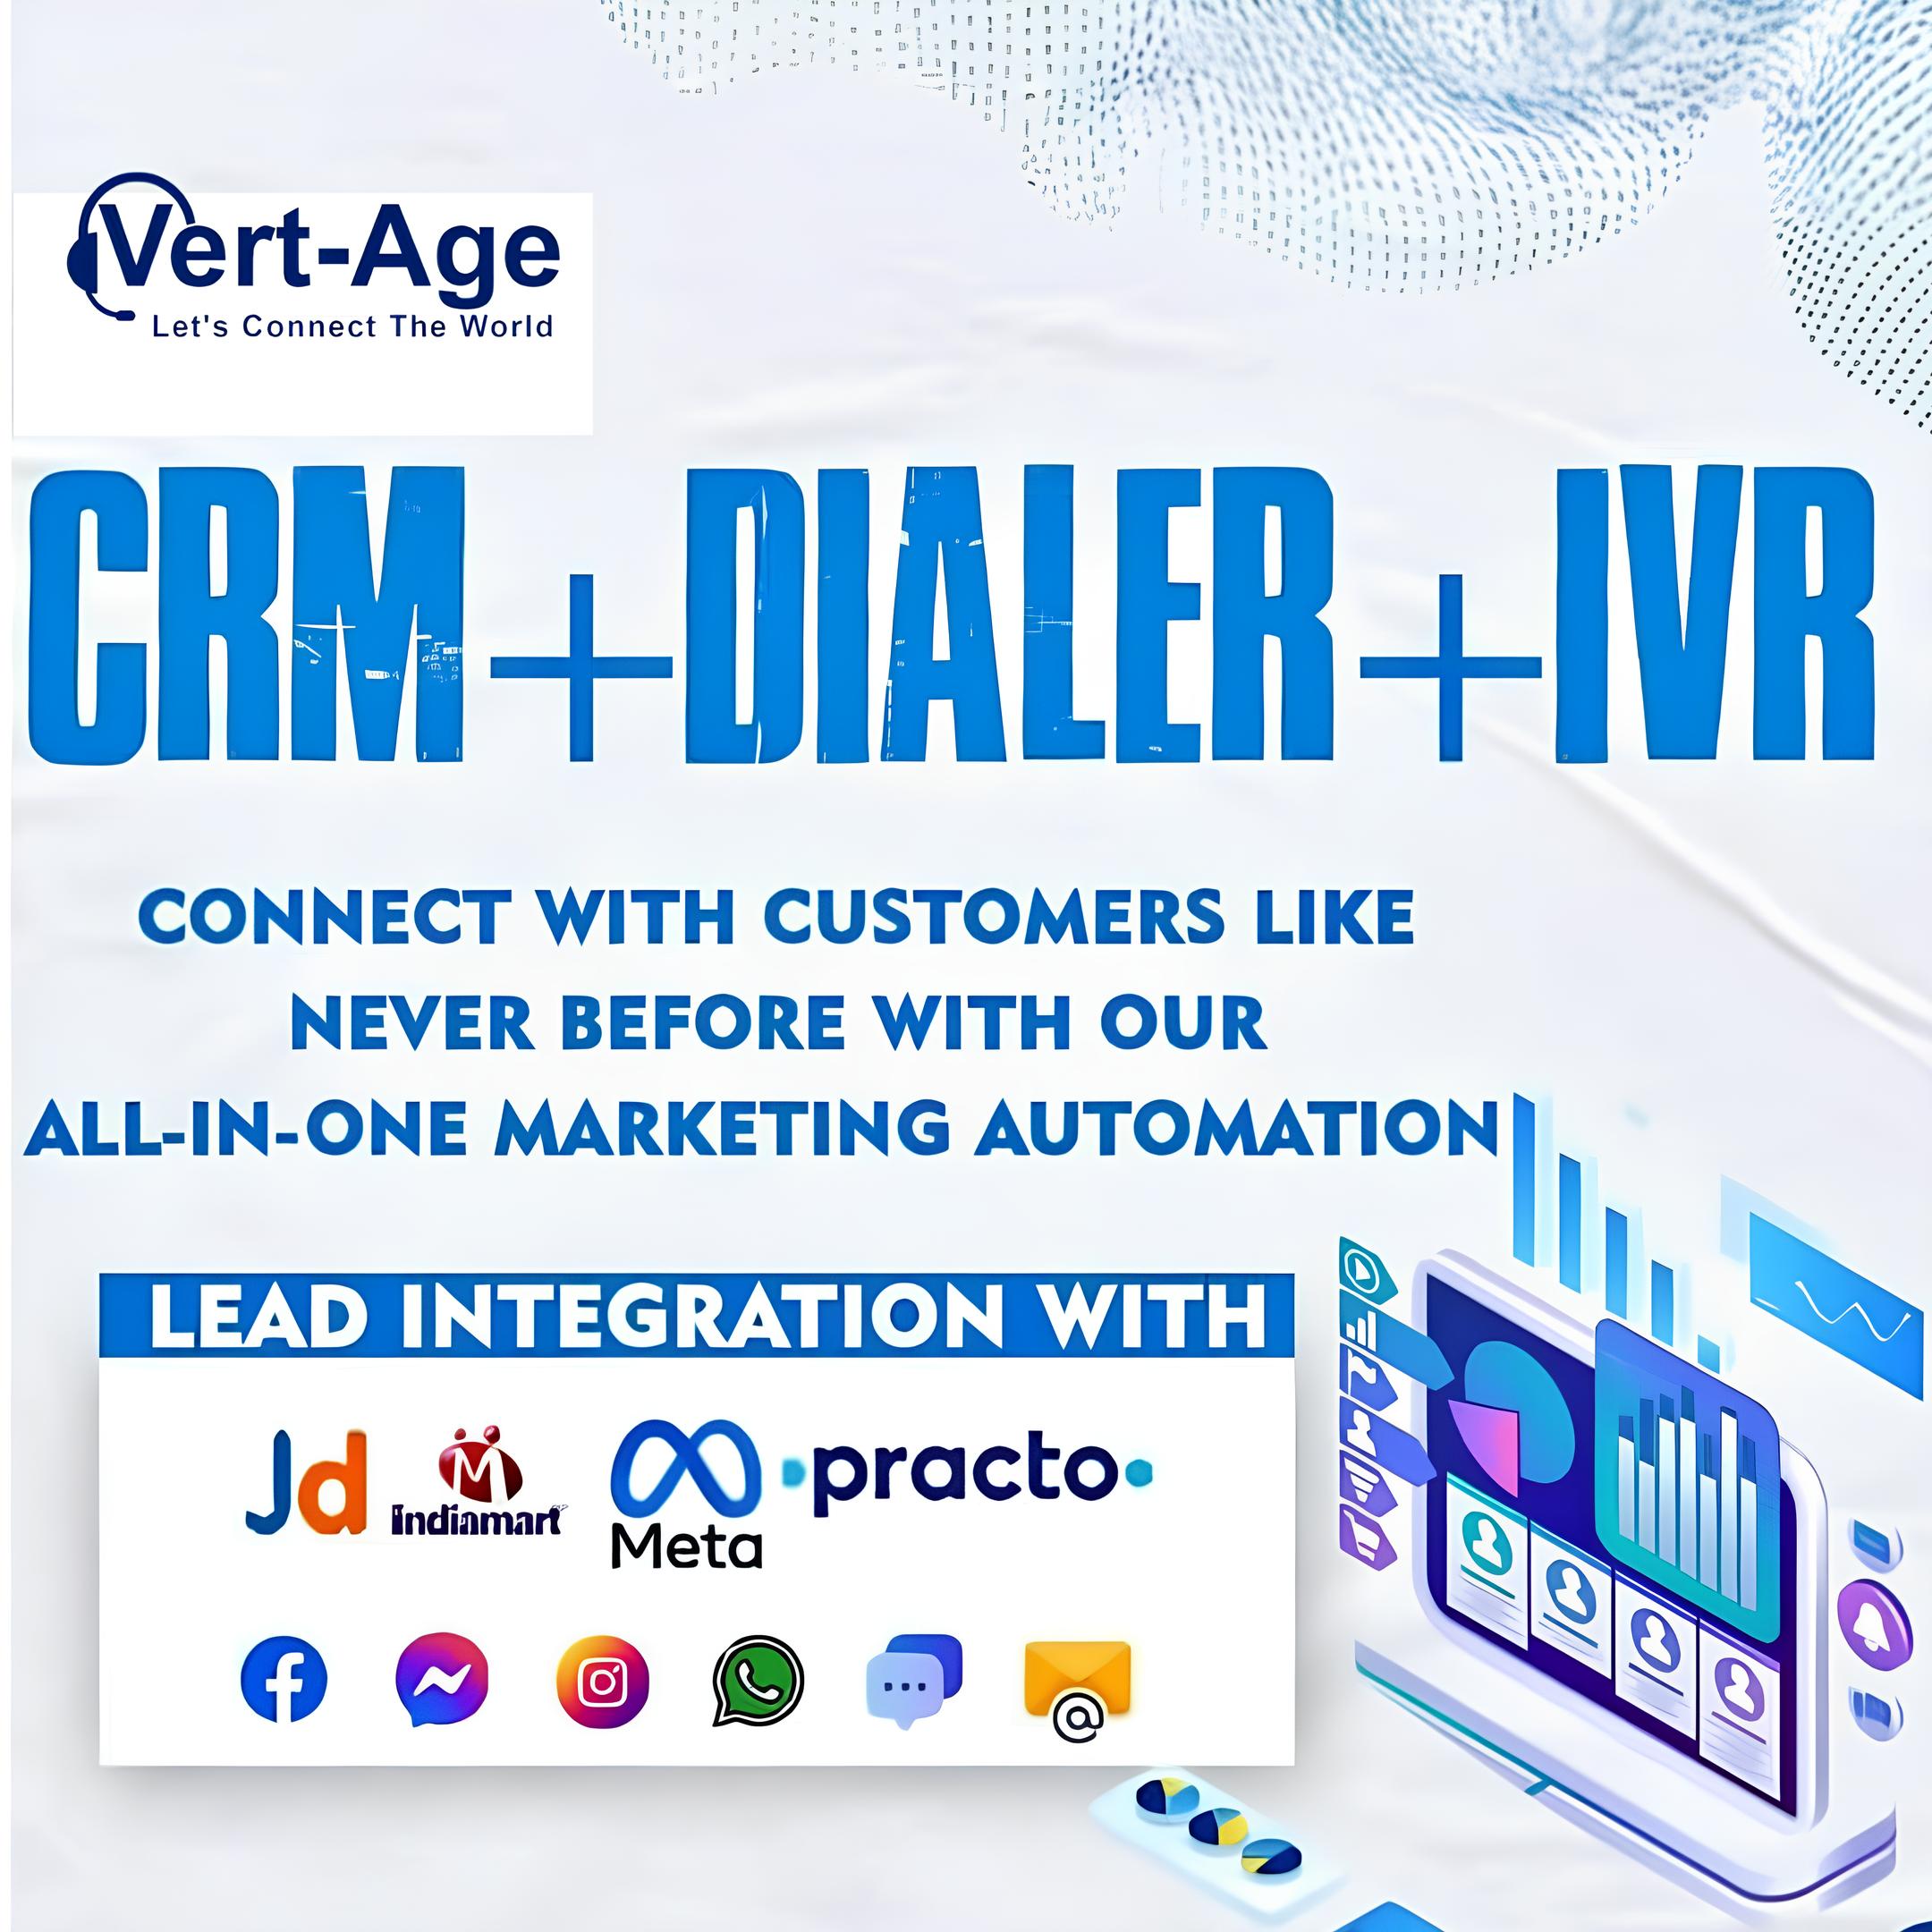 The-Benefits-of-CRM-and-IVR-Software-